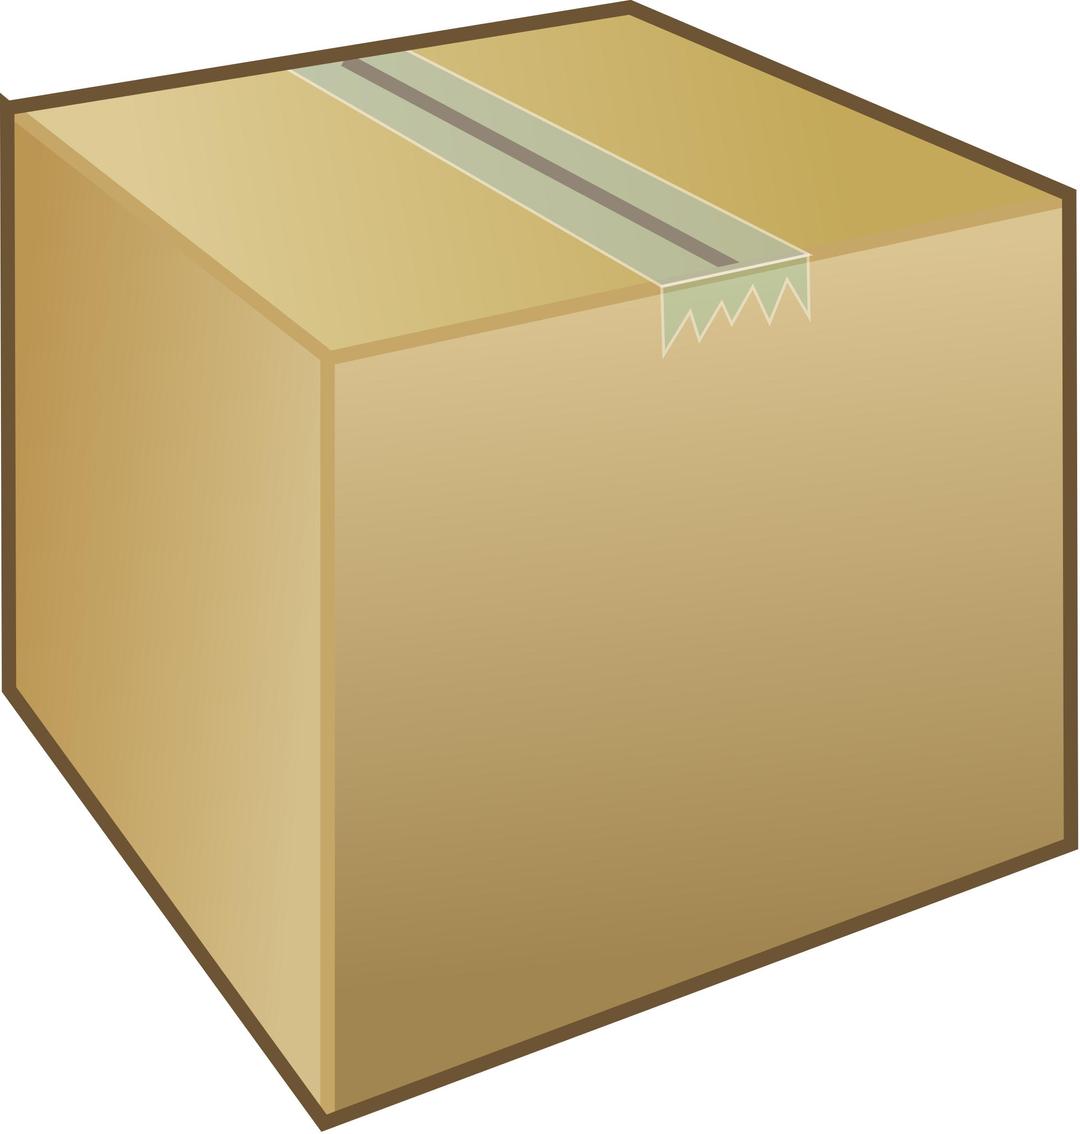 Cardboard box / package png transparent